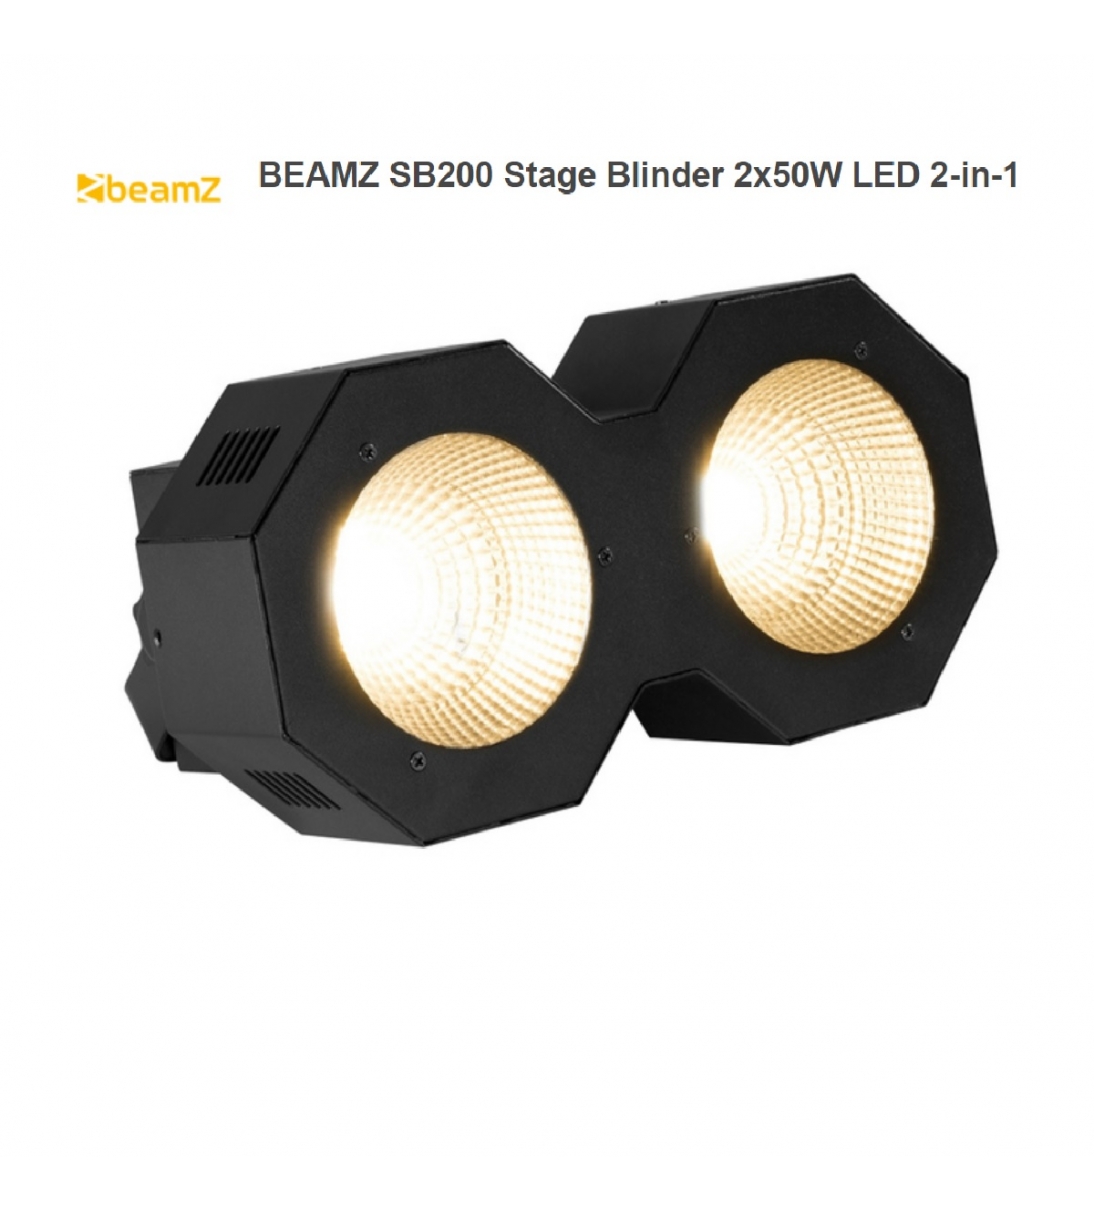 SB200 Stage Blinder 2x50W LED 2-in-1